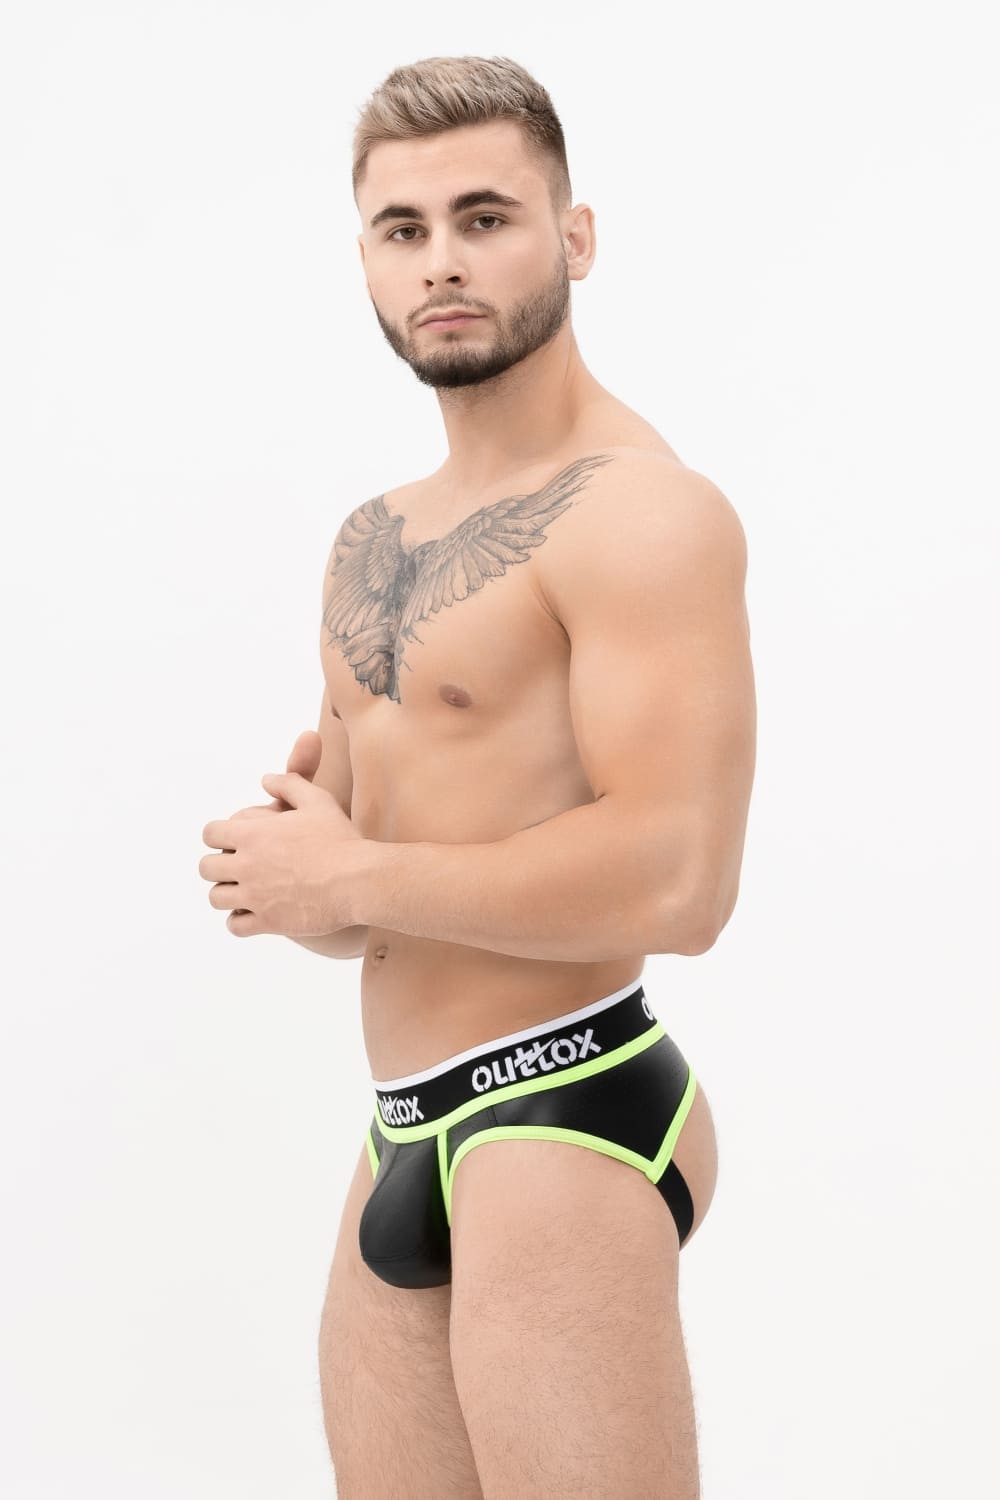 Outtox. Open Rear Briefs with Snap Codpiece. Black+Green &